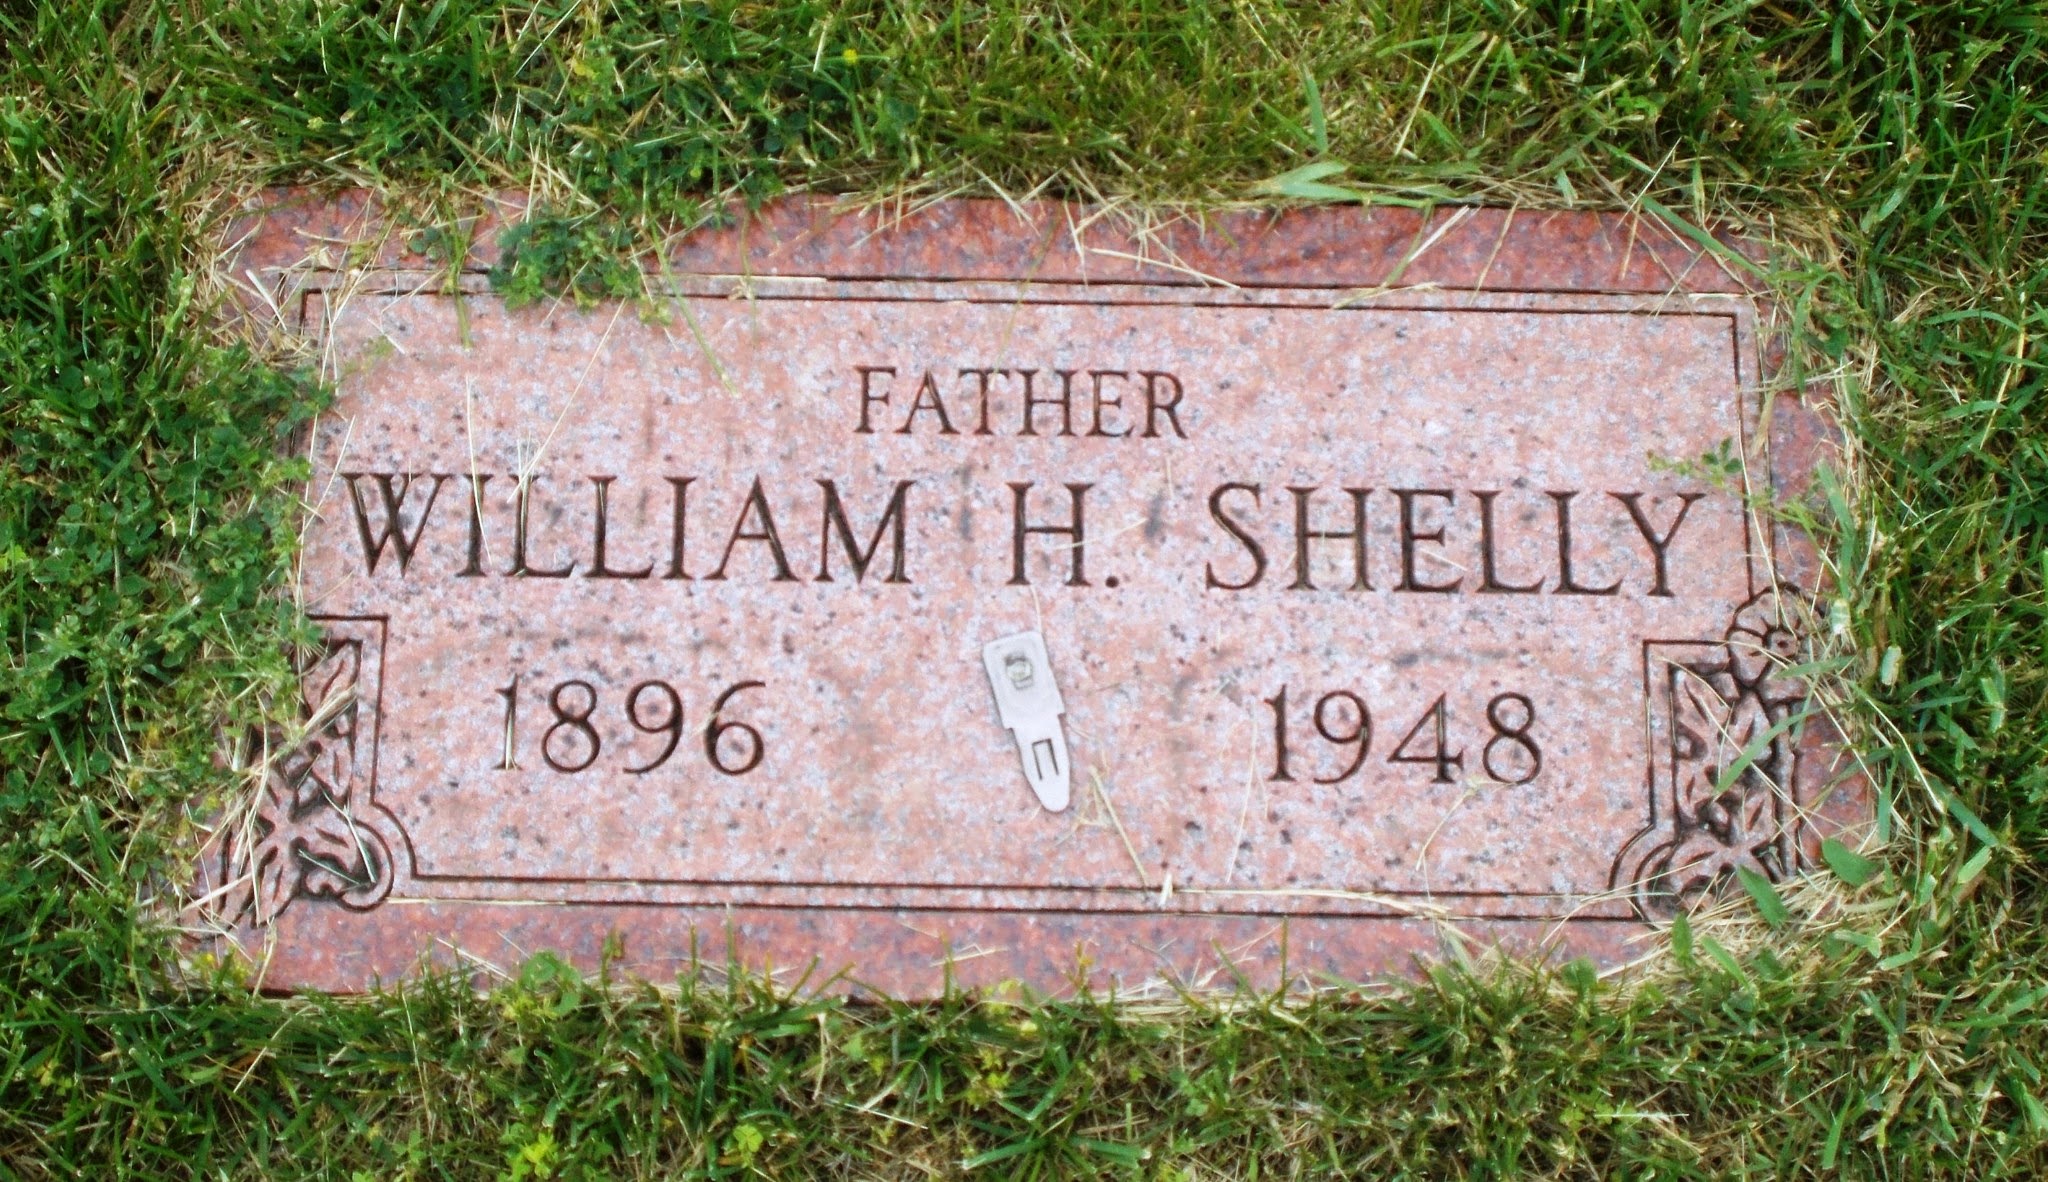 William H Shelly